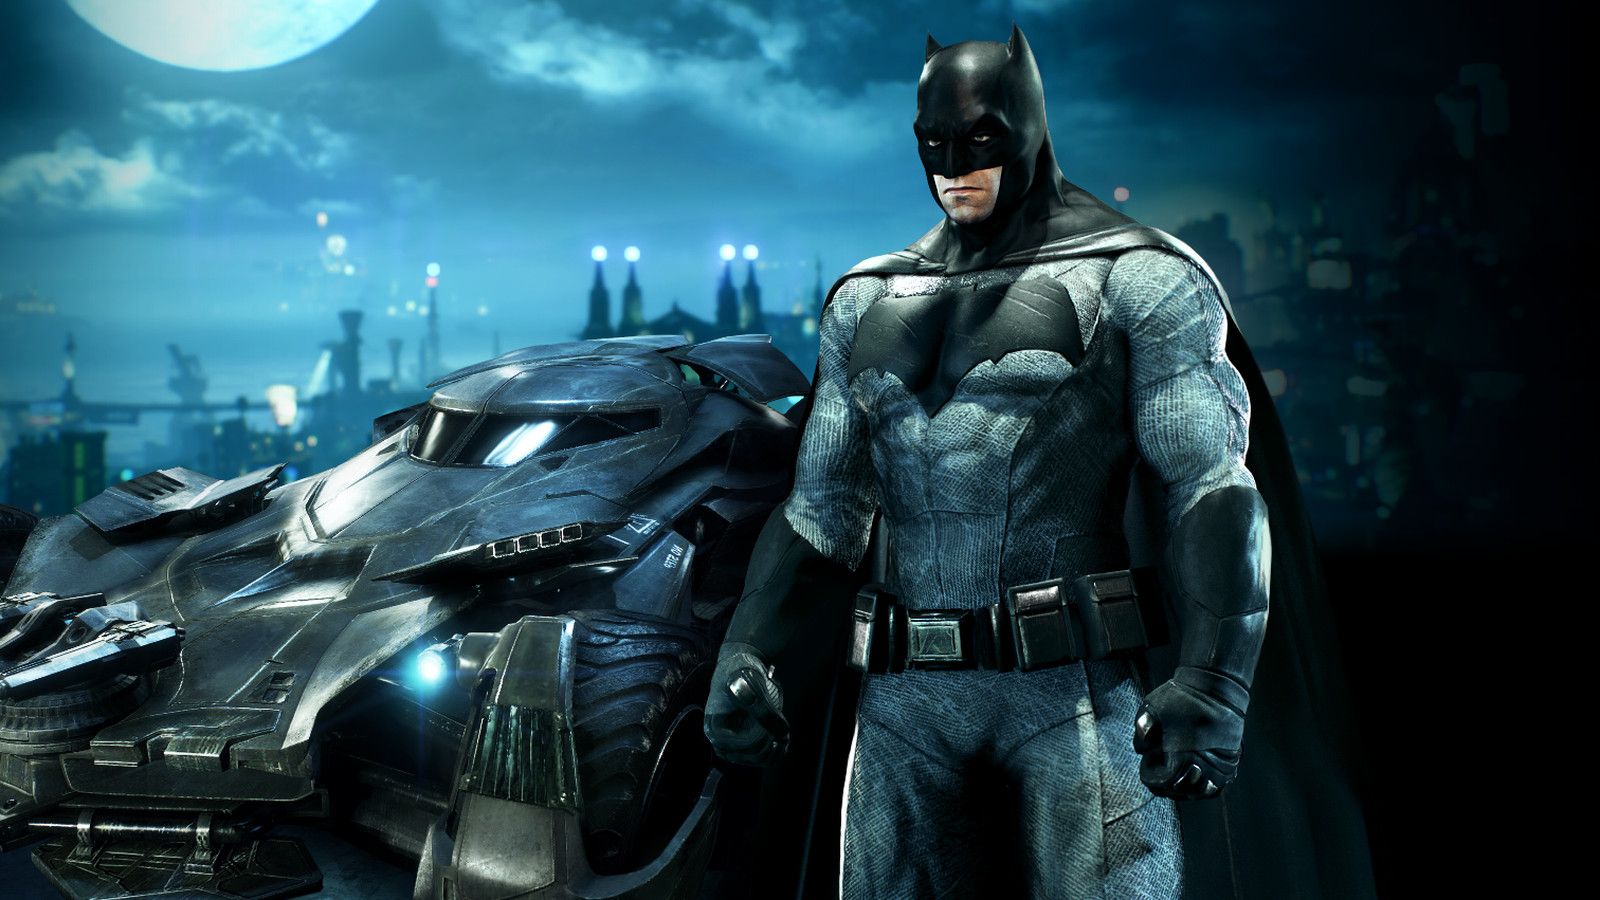 Ben Affleck's costume and Batmobile are coming next month to